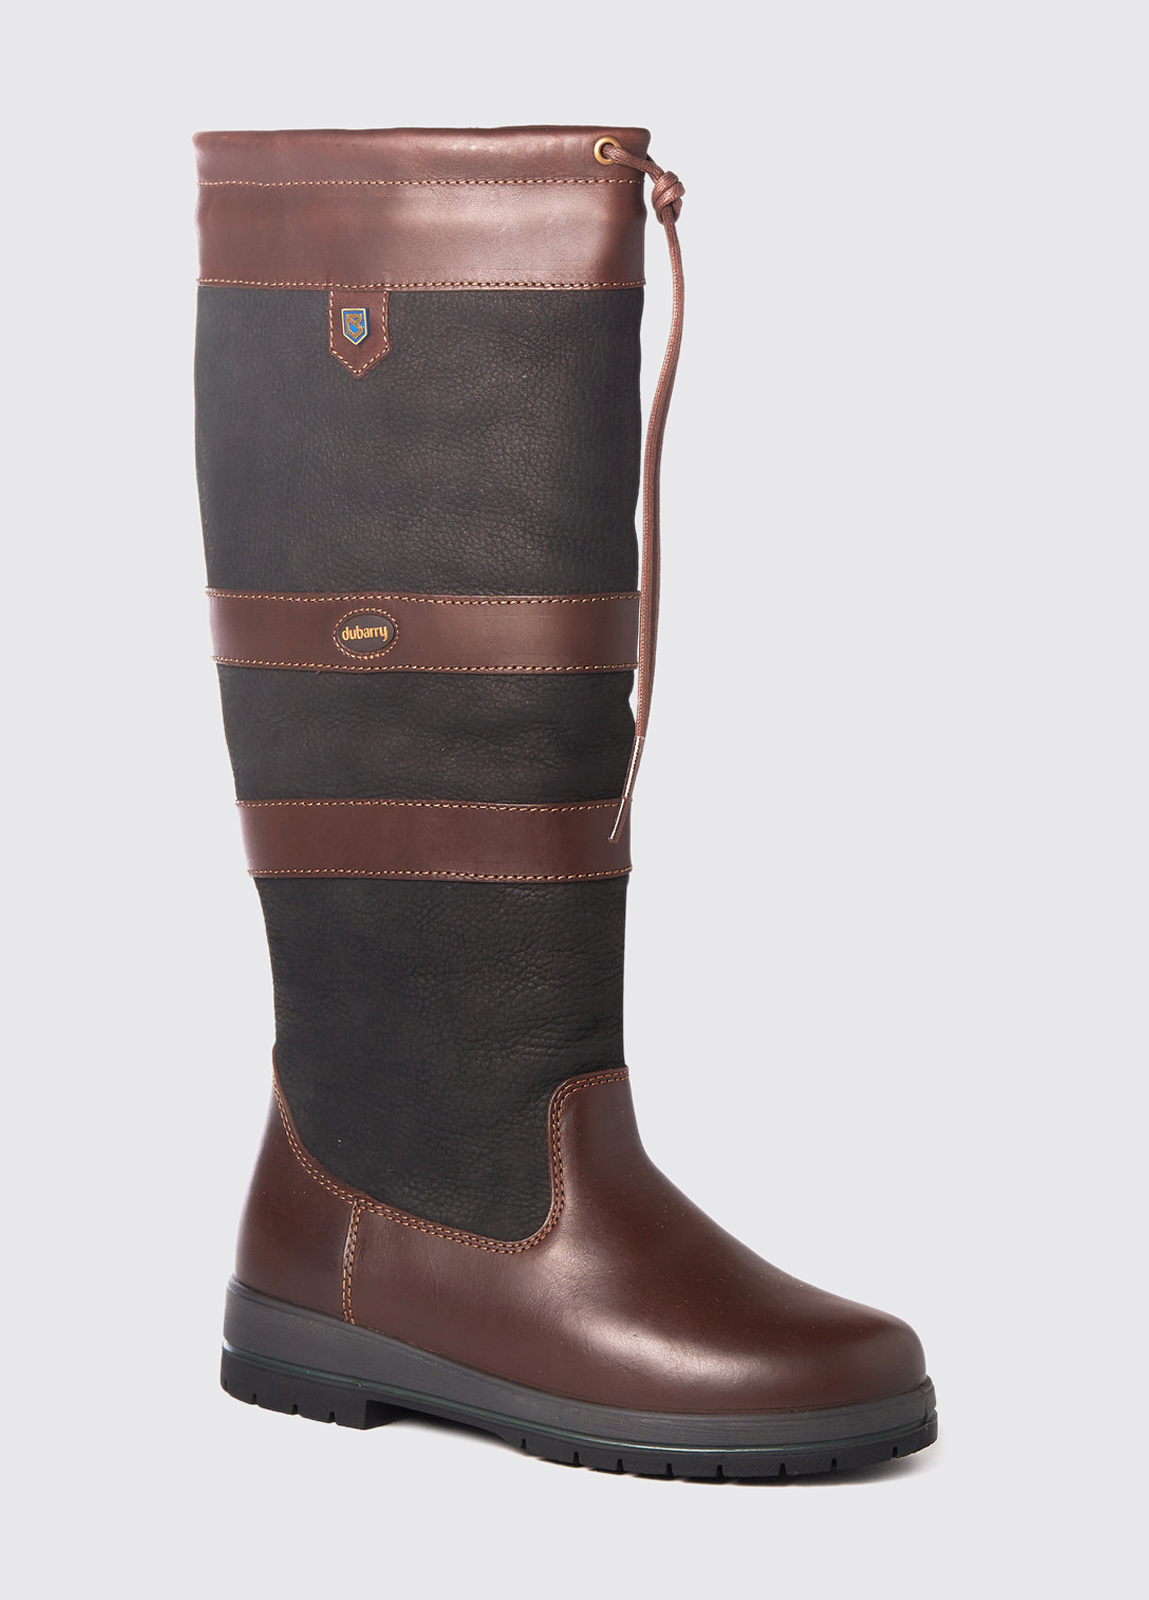 Galway ExtraFit™ Country Boot | Dubarry USA